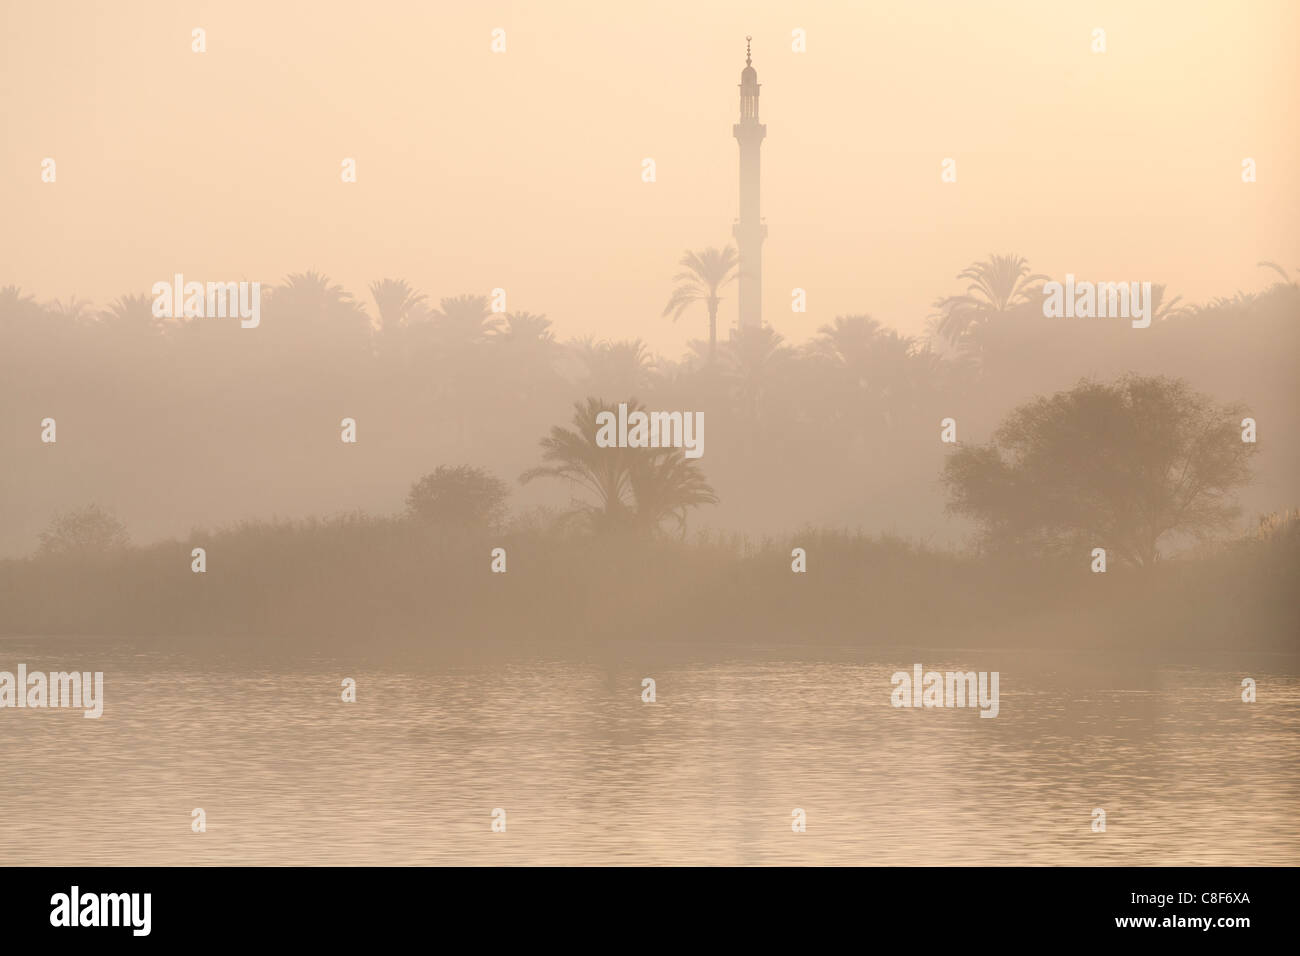 A section of Nile river bank with heavy mist creating muted colour layers, water trees, palms and mosque minaret, Egypt Africa Stock Photo